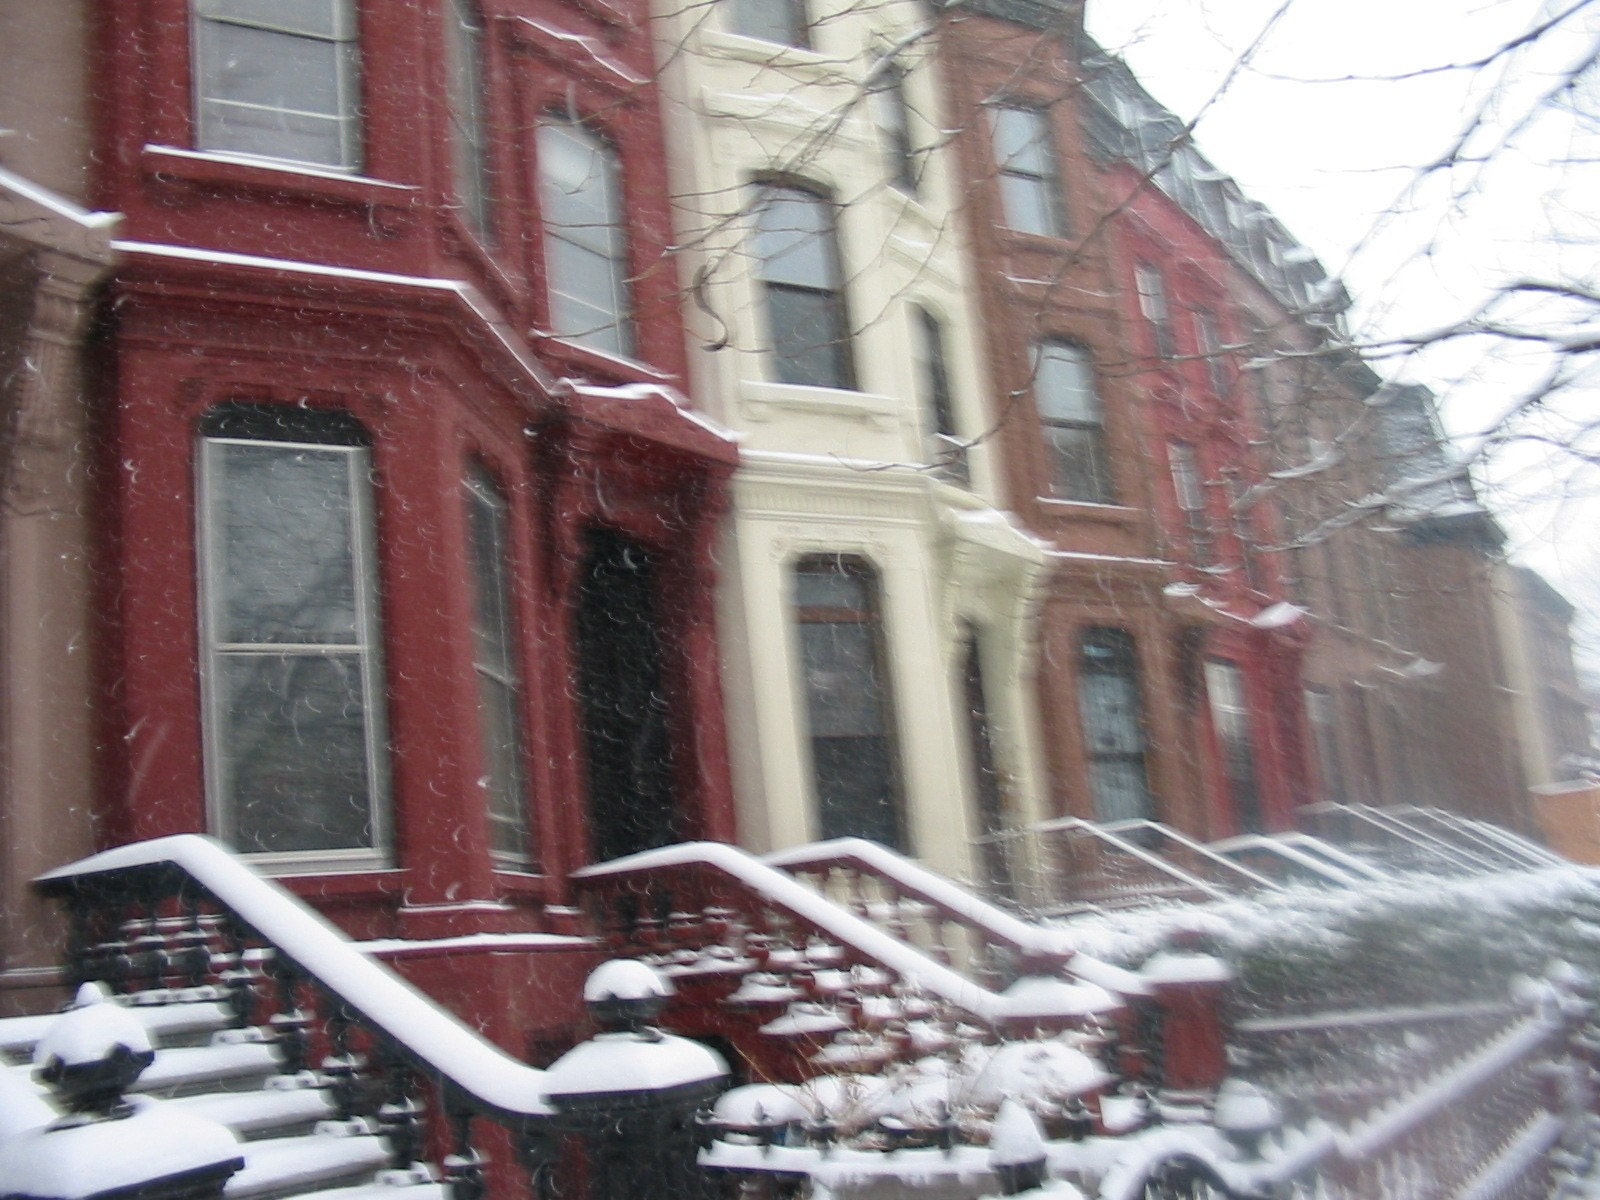 Brooklyn Snow, 8x10 Matted Photograph